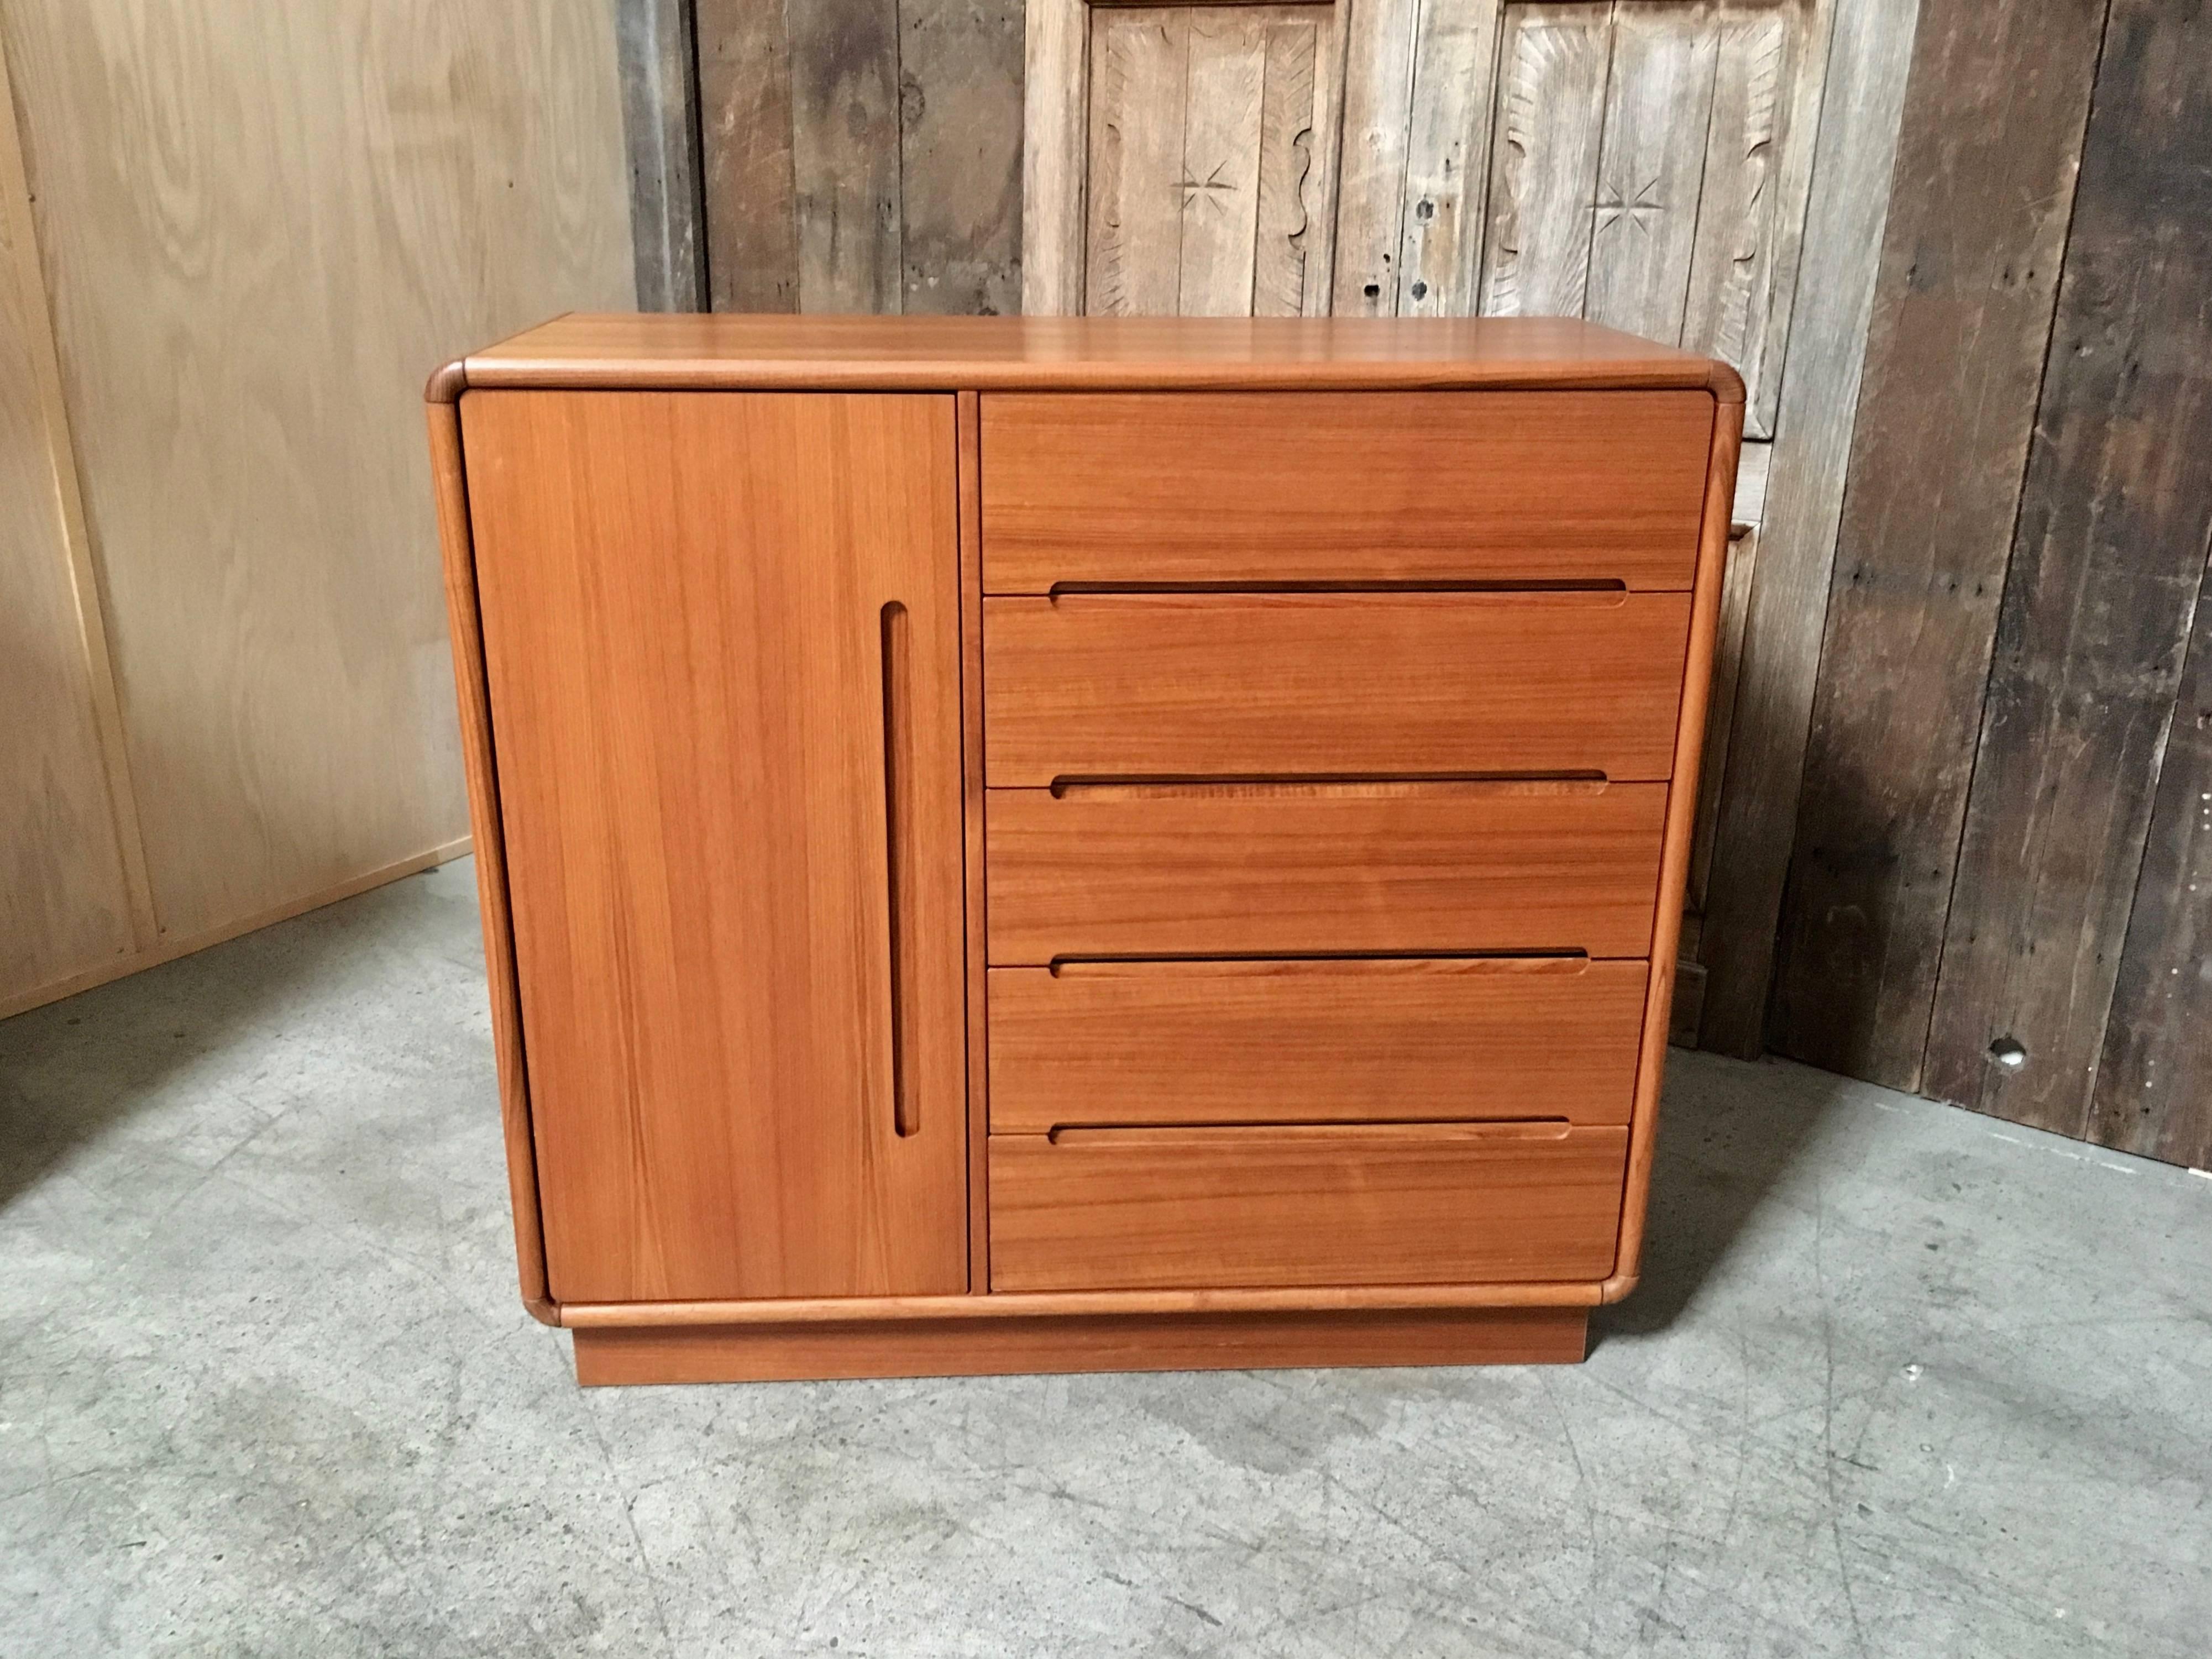 Very practical armoire with five drawers on the right side and two more jewelry drawers inside the doored section with two shelves.